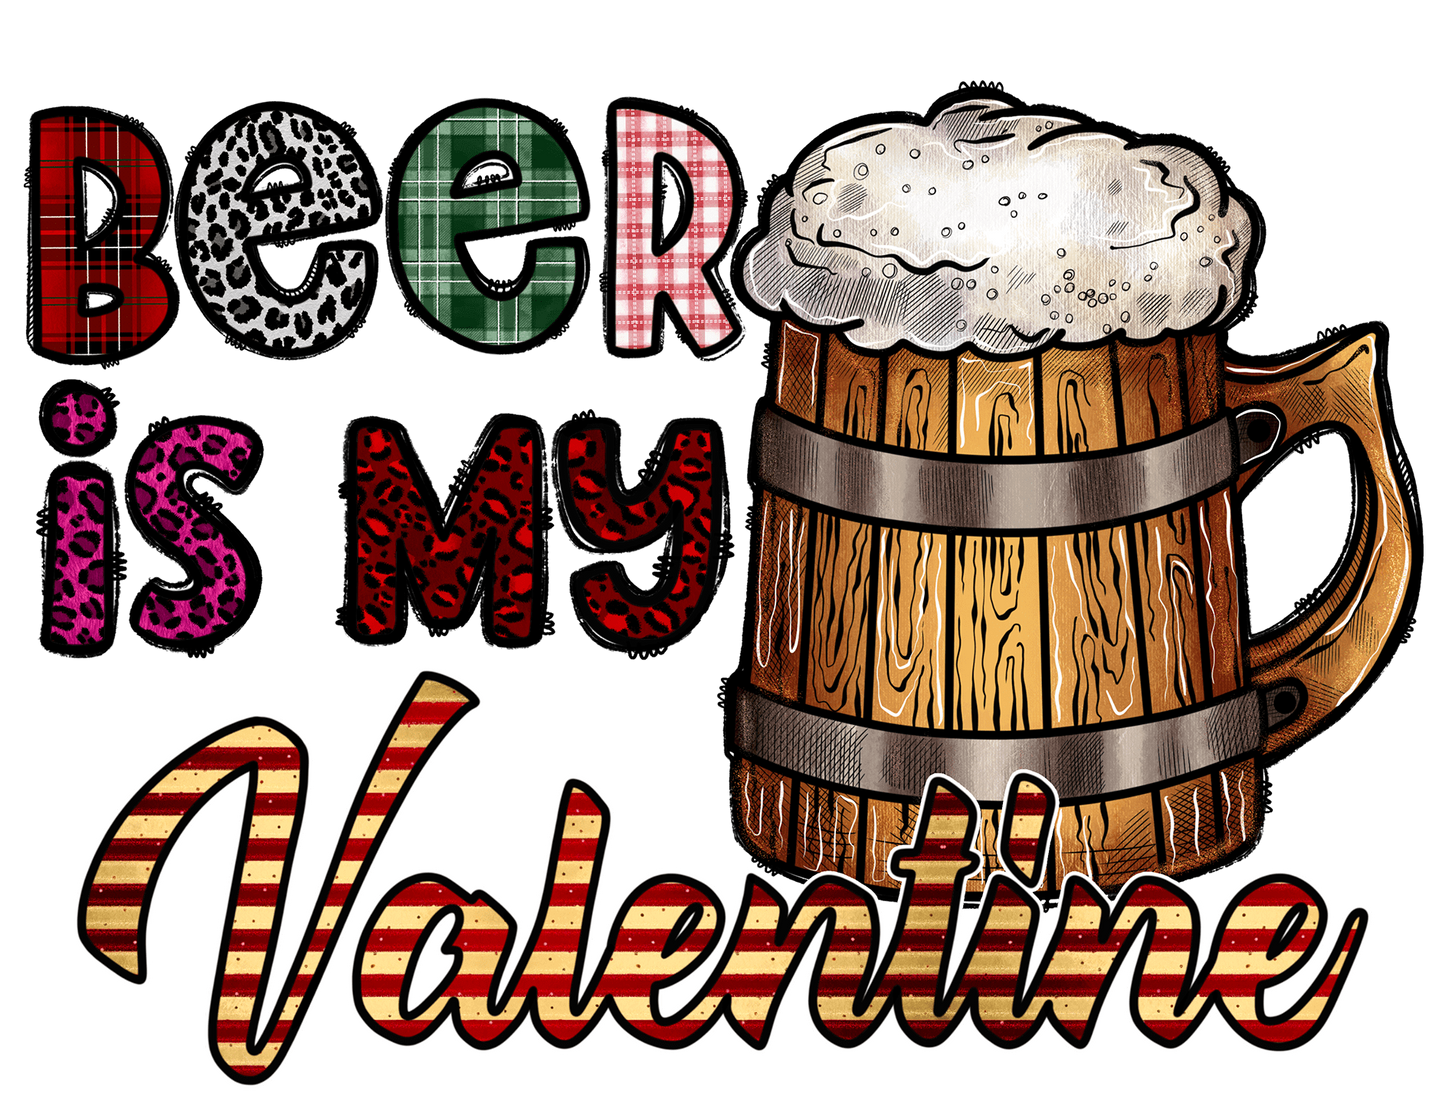 Personalized Valentine Coffee Mug: "Beer Is My Valentine V85" - 11 or 15 Oz with Box - White - FREE SHIPPING